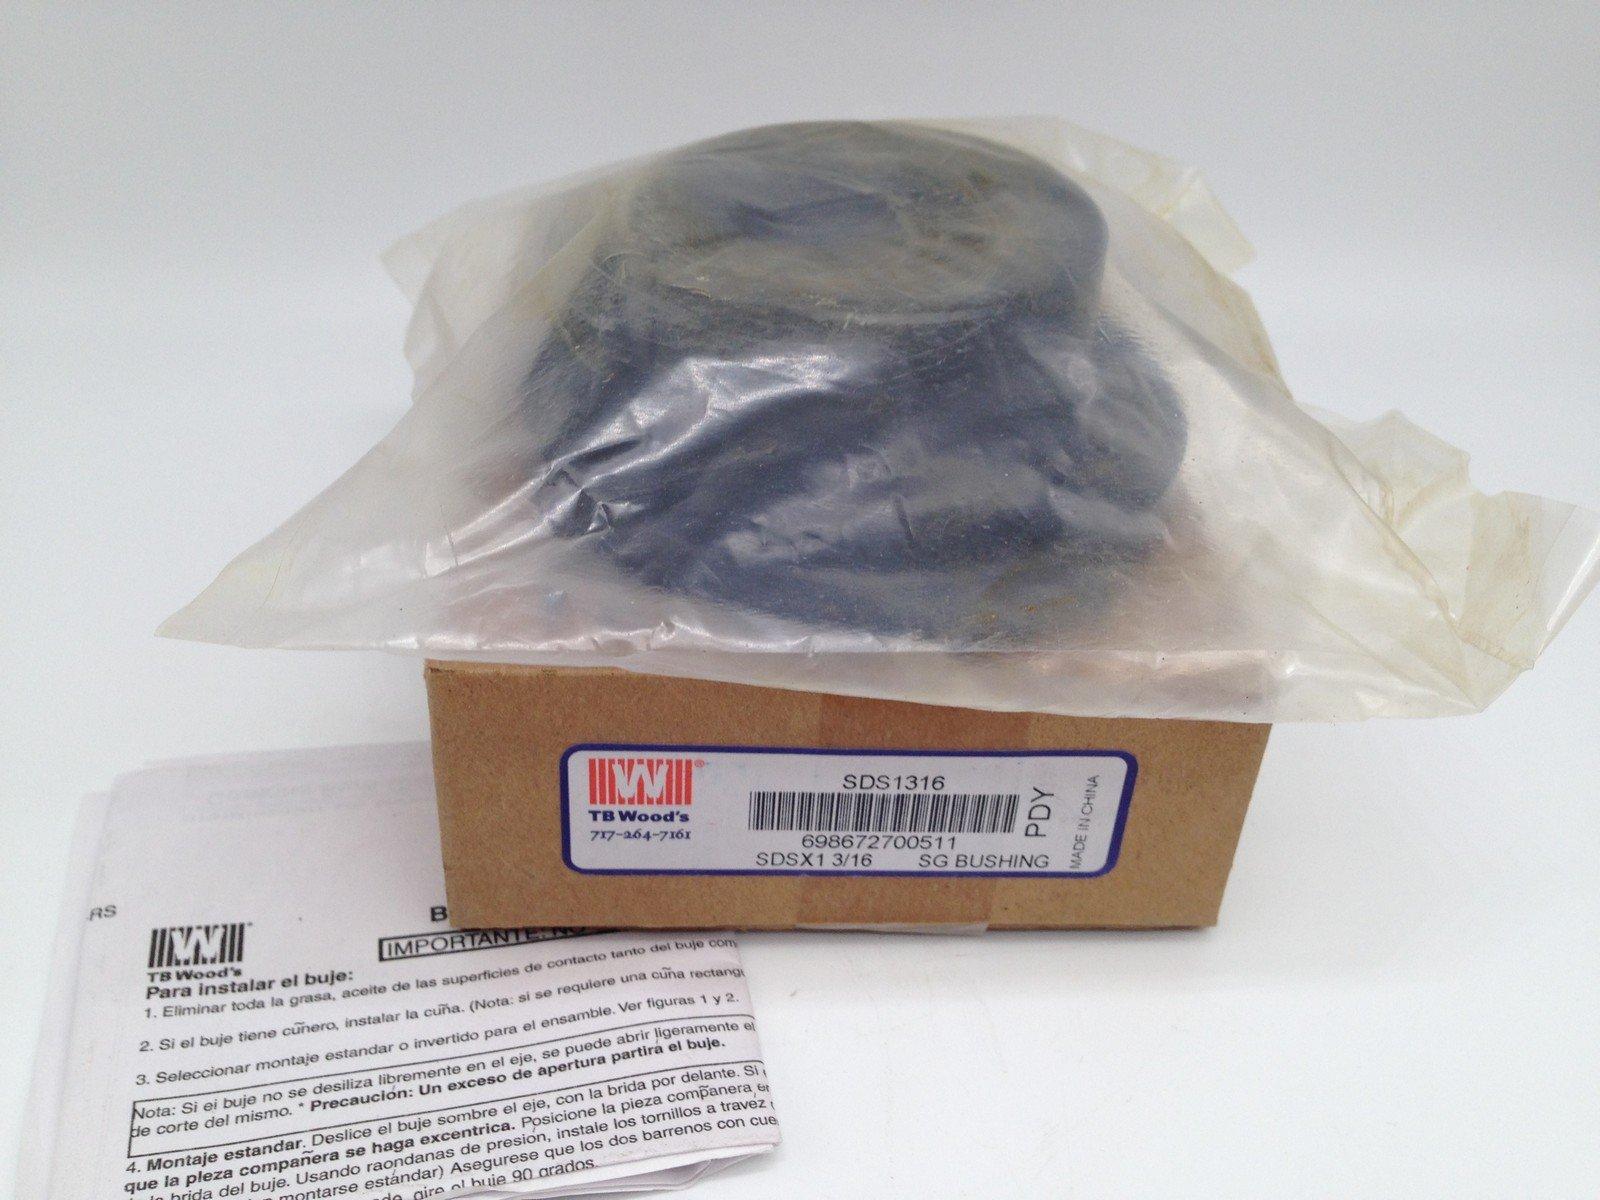 NEW WOODS SDS X 1 3/16 QD BUSHING, 1.18875 IN. BORE 